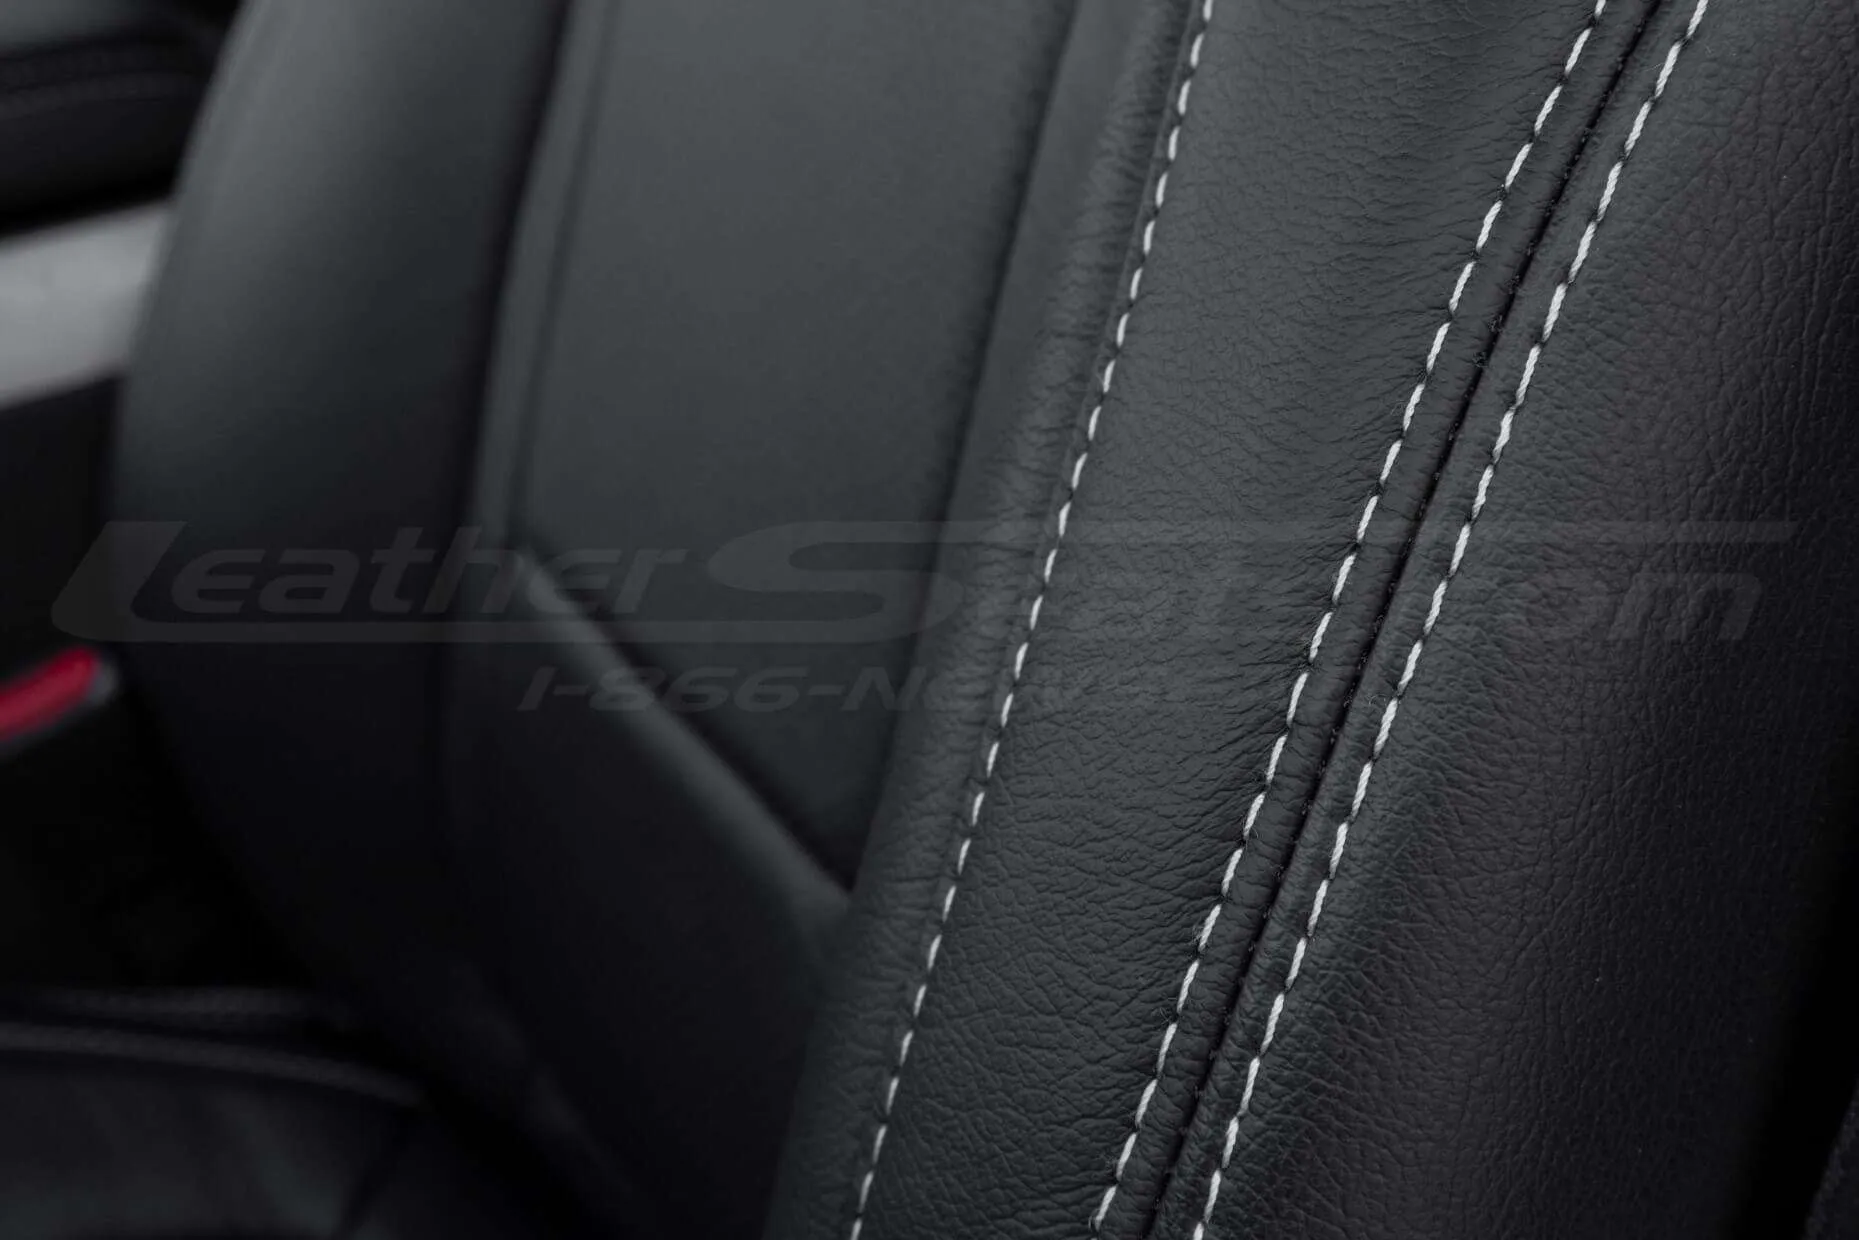 Black leather with contrasting silver double-stitching